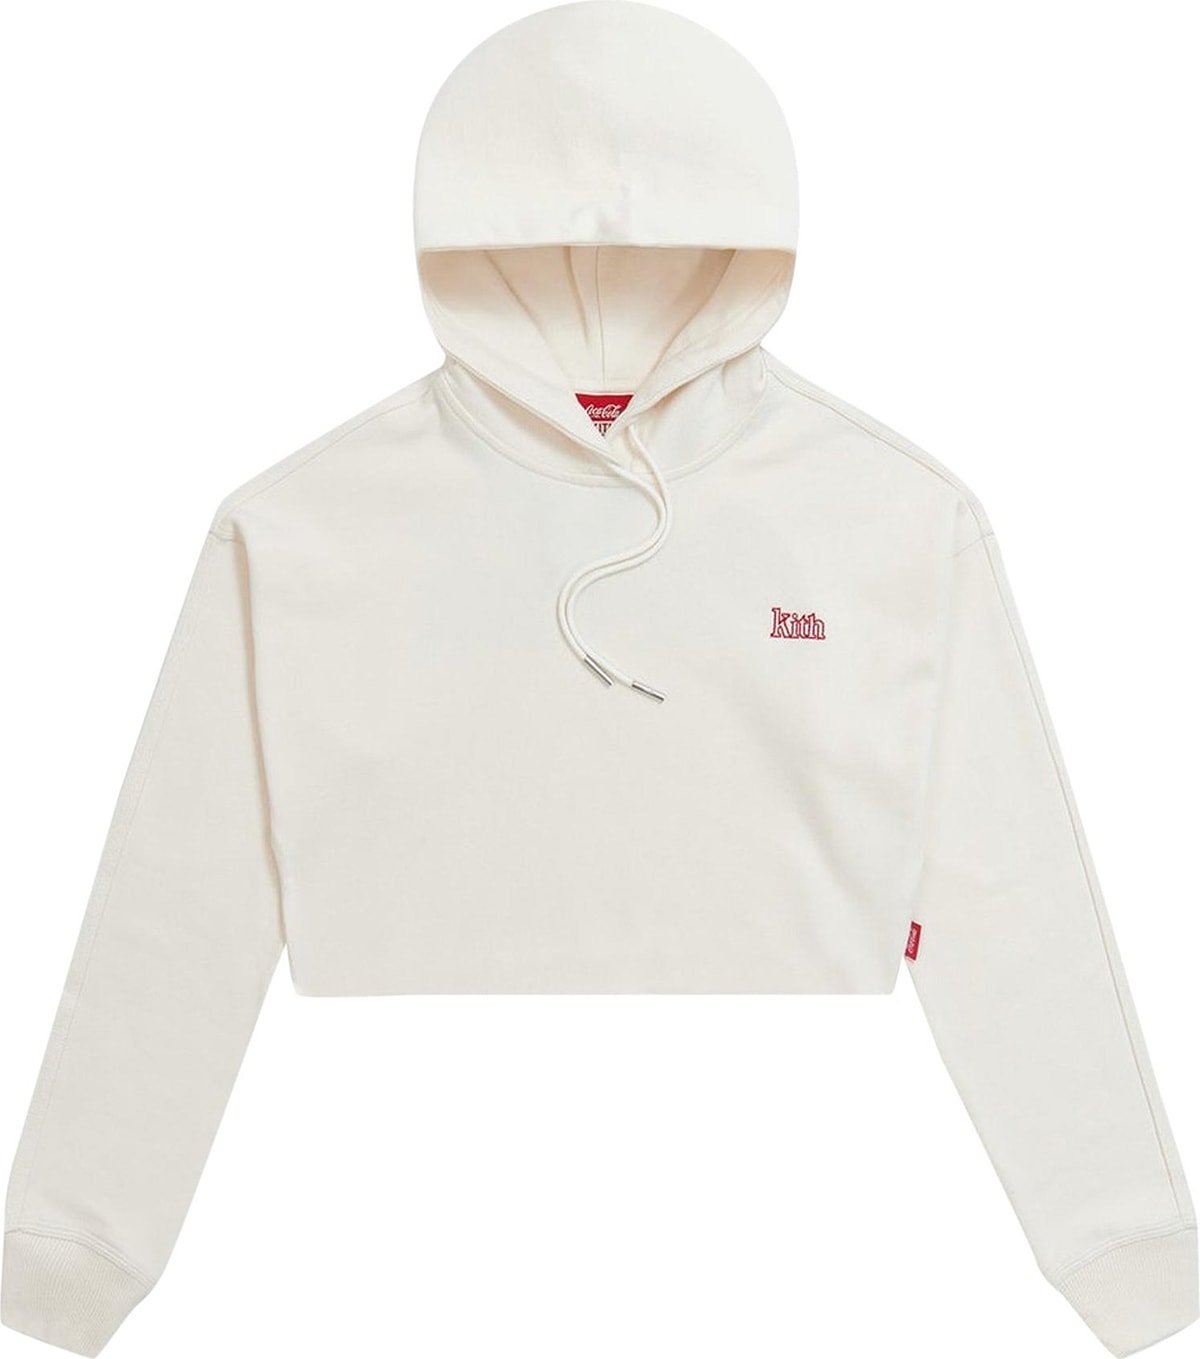 The Coca-Cola Simran crop hoodie was first released in August 2020 as part of Kith's Spring/Summer 2020 collection